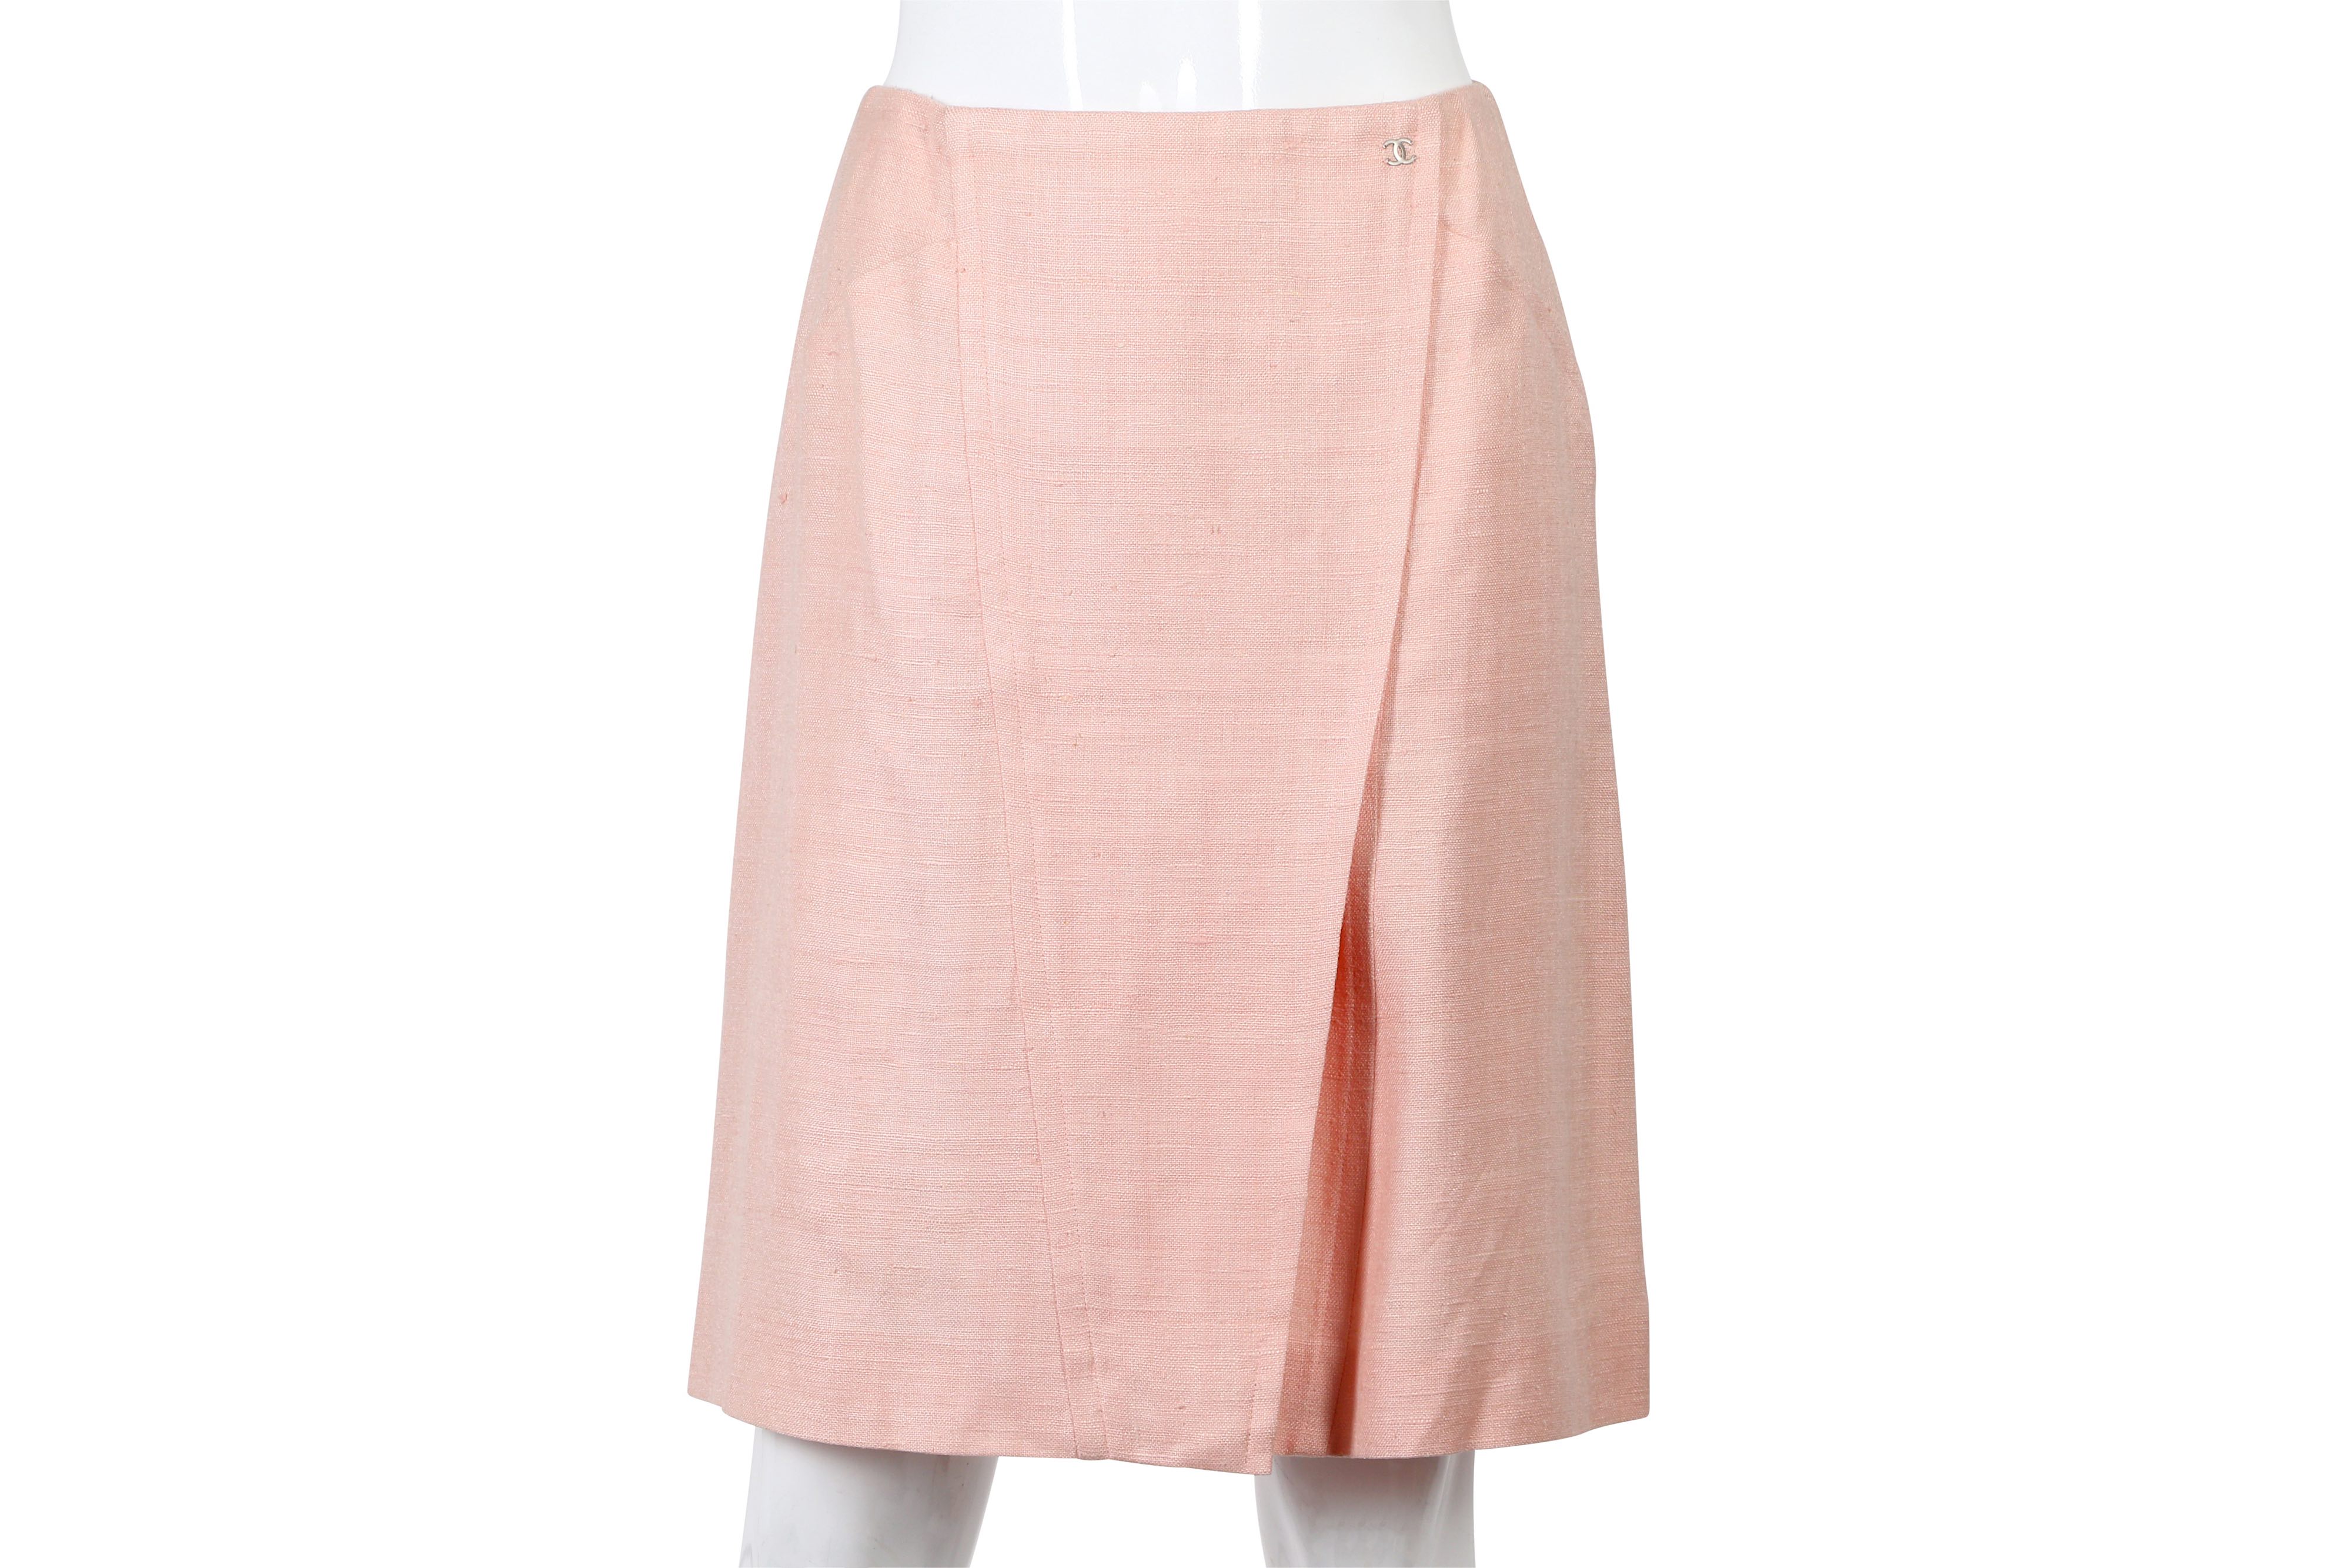 Chanel Pale Pink Silk Skirt - size 38 - Image 3 of 5